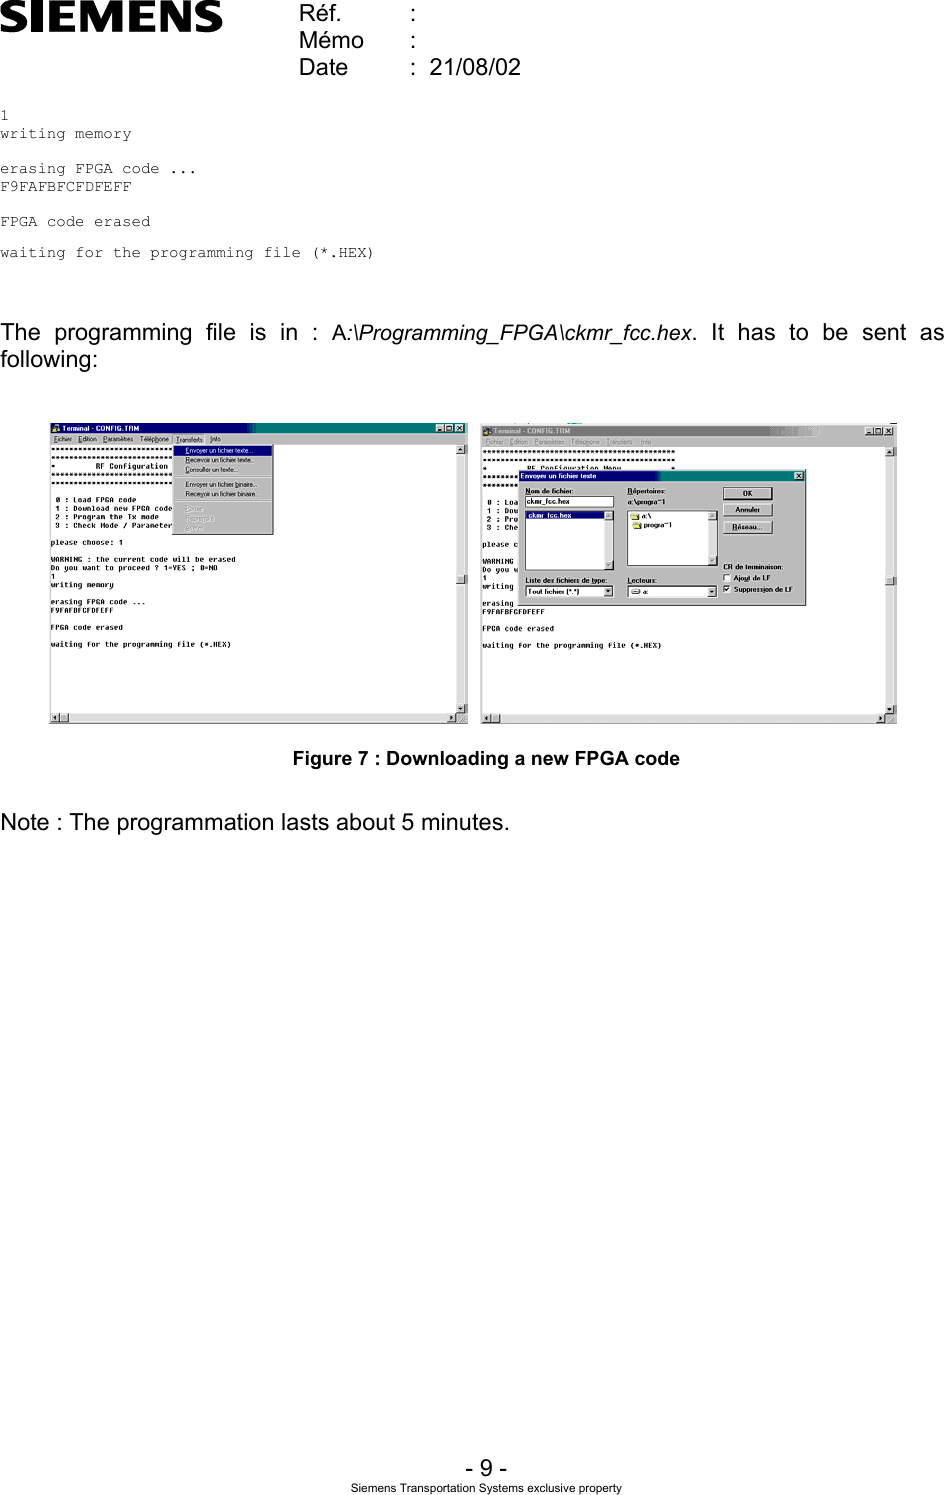    Réf.  :        Mémo  :        Date  :  21/08/02       - 9 - Siemens Transportation Systems exclusive property  1writing memoryerasing FPGA code ...F9FAFBFCFDFEFFFPGA code erasedwaiting for the programming file (*.HEX)   The programming file is in : A:\Programming_FPGA\ckmr_fcc.hex. It has to be sent as following:      Figure 7 : Downloading a new FPGA code  Note : The programmation lasts about 5 minutes. 